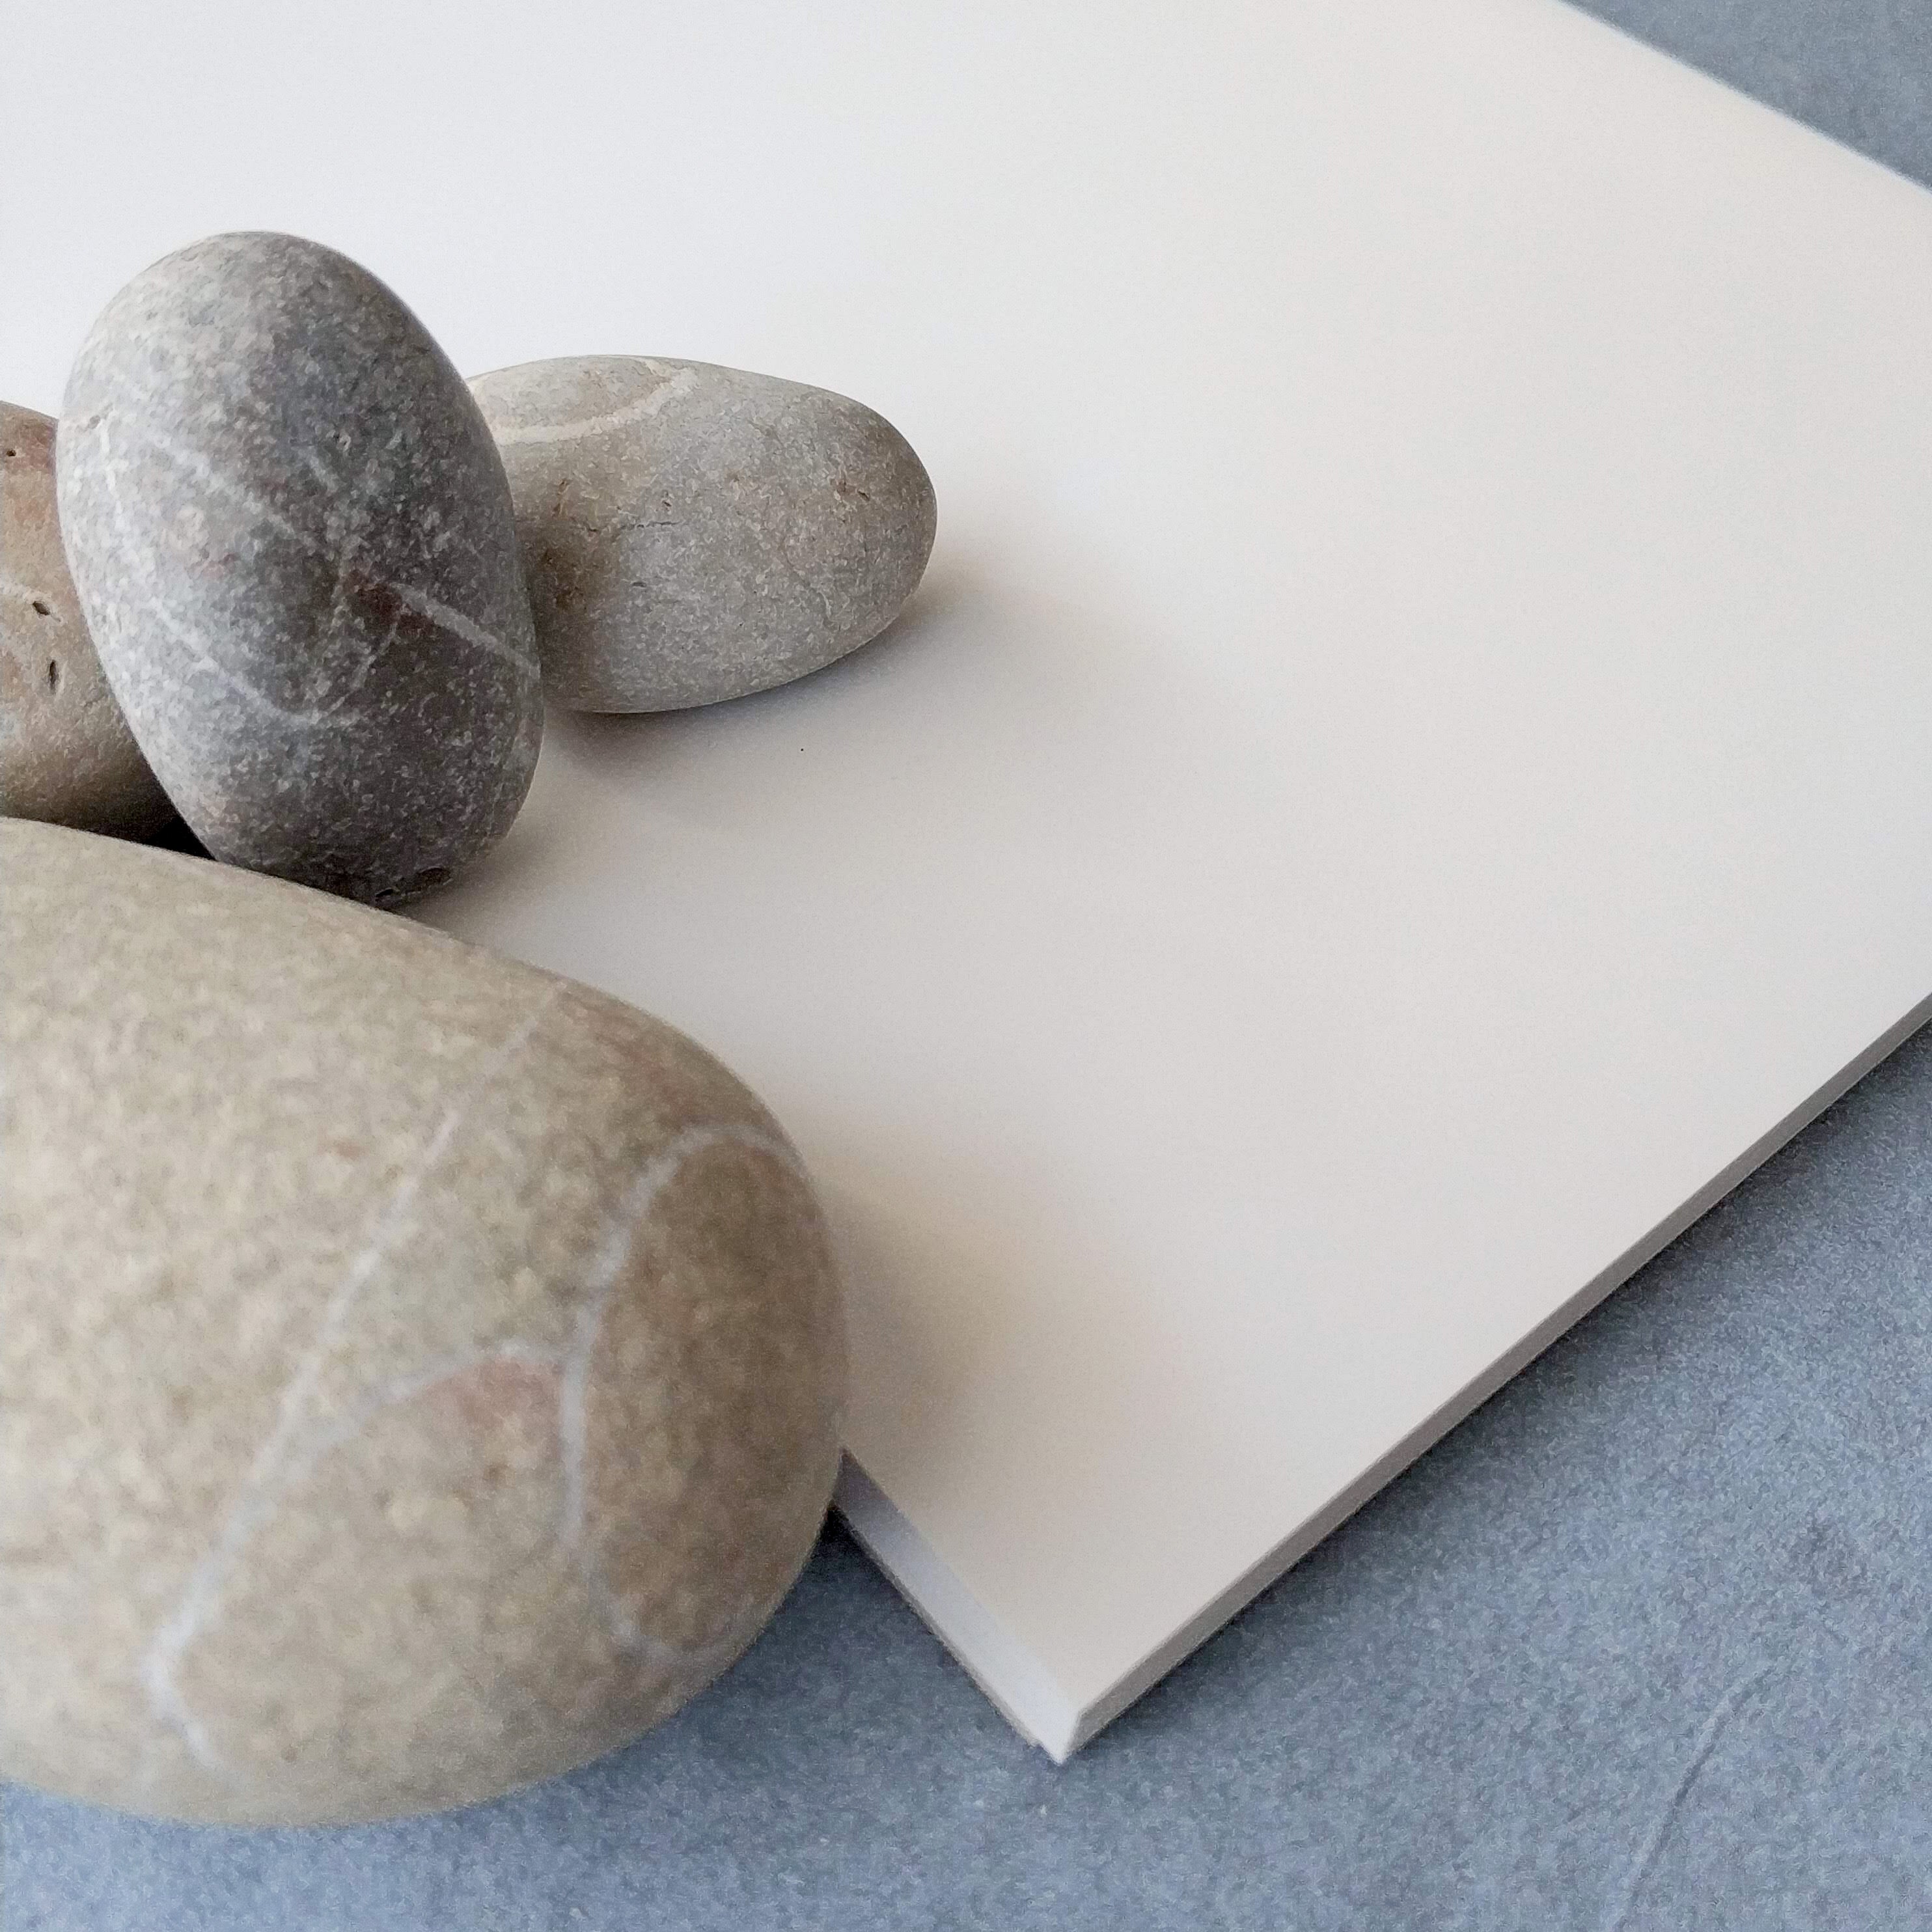 "Meaning of a thought" on Stonepaper